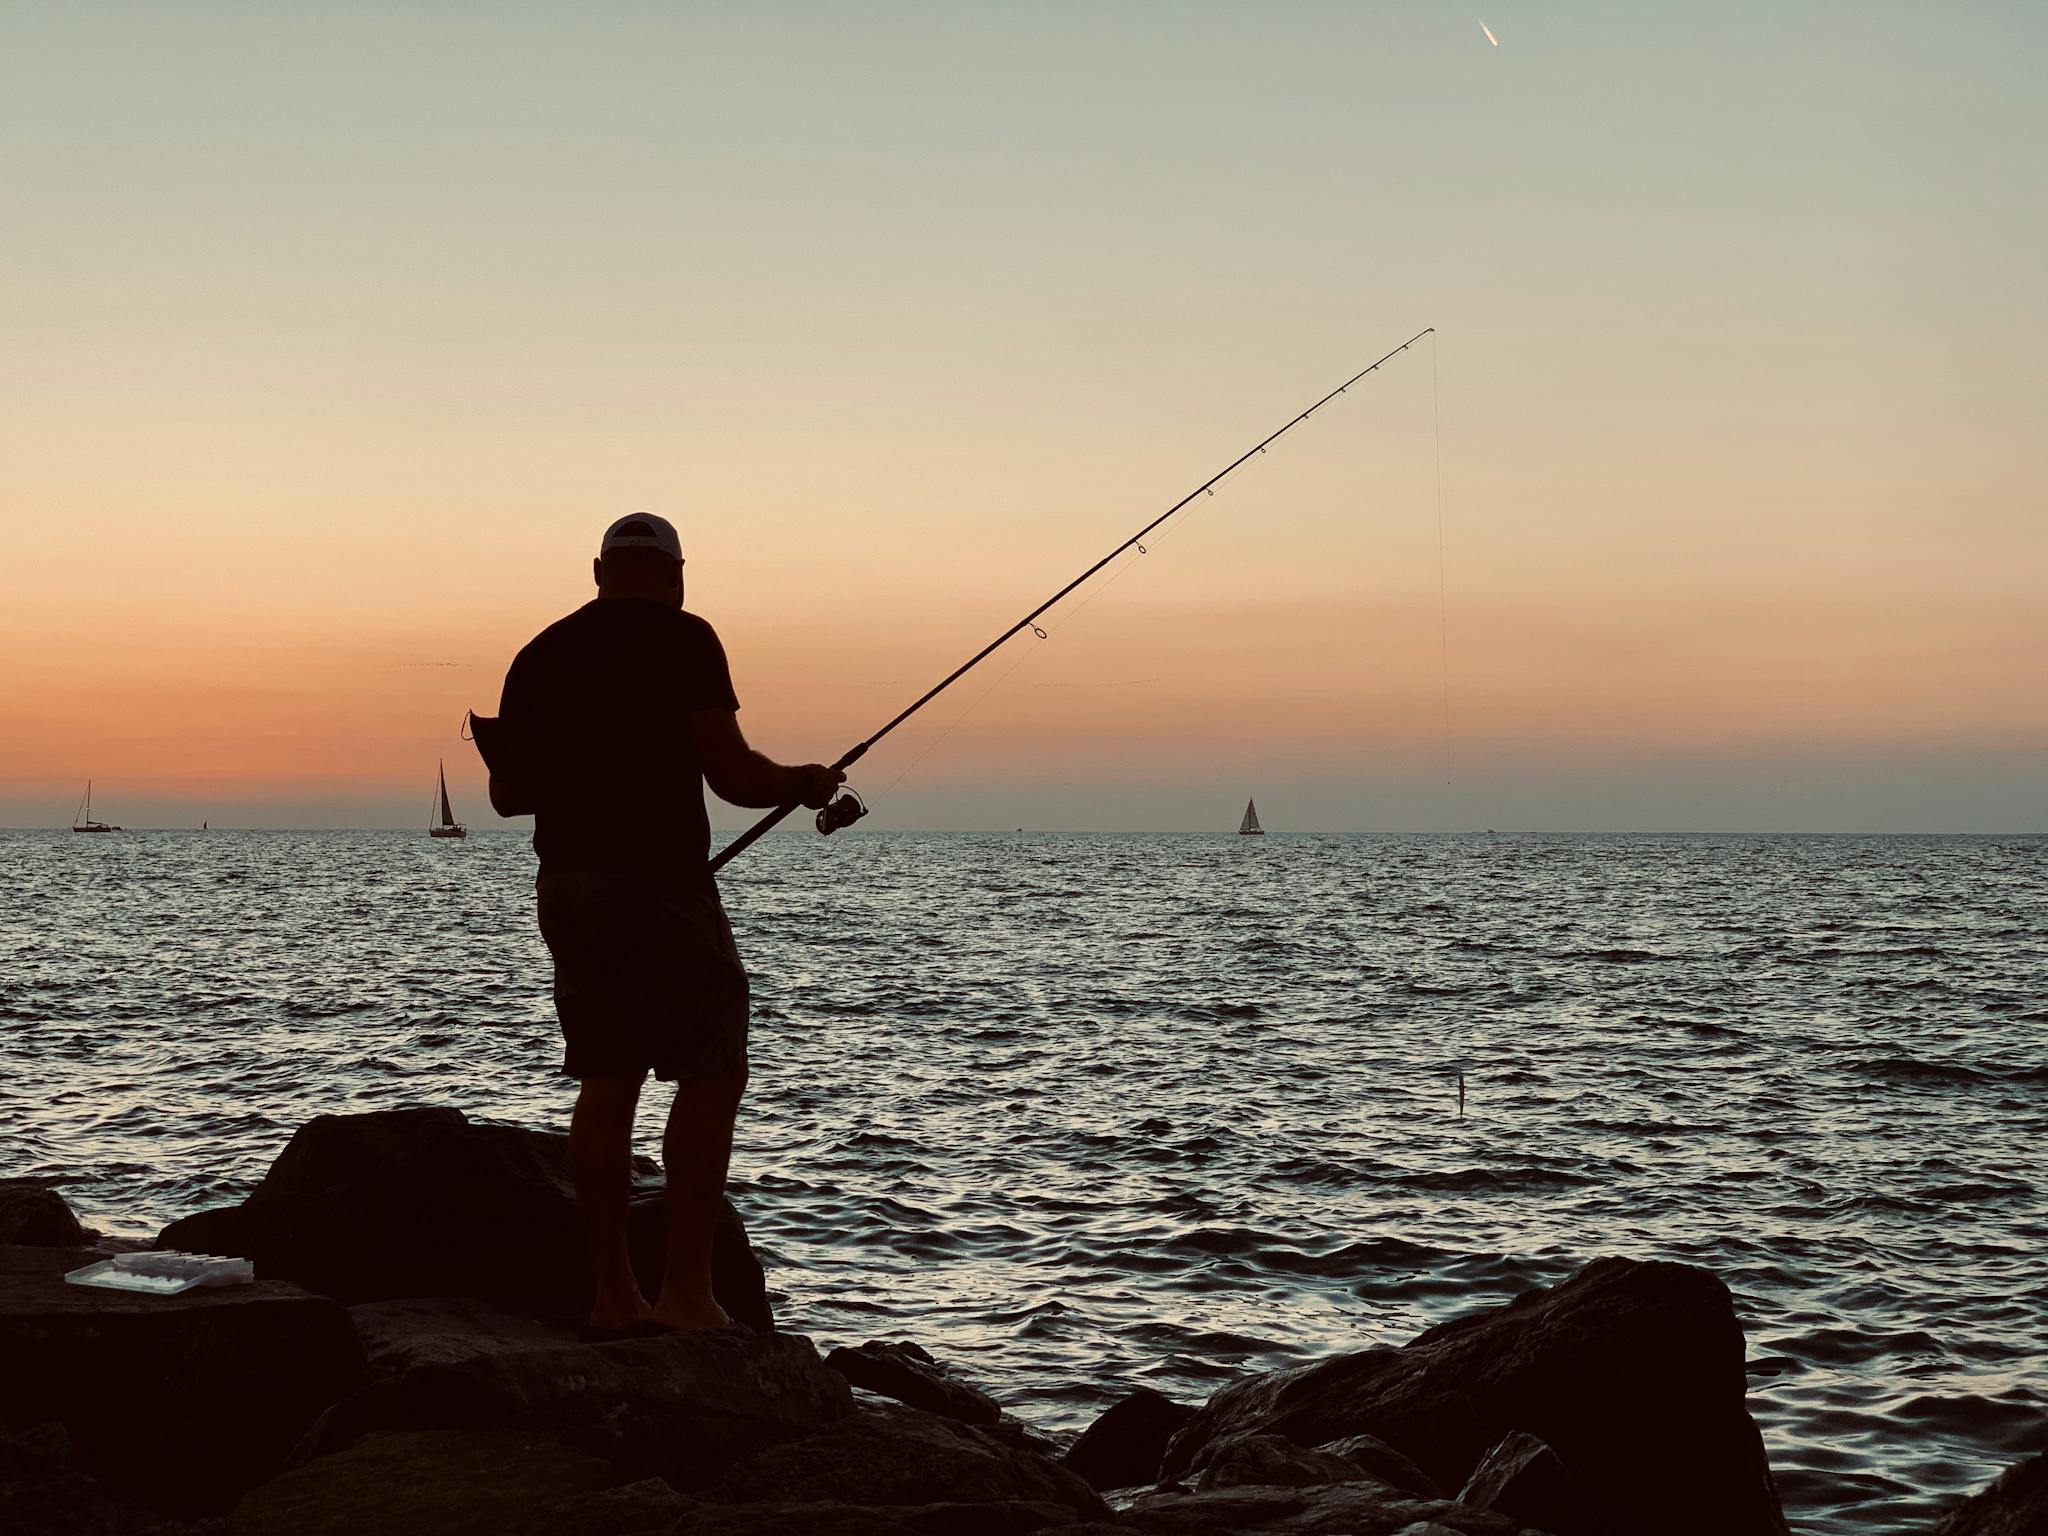 A man fishing on the rocks at sunset